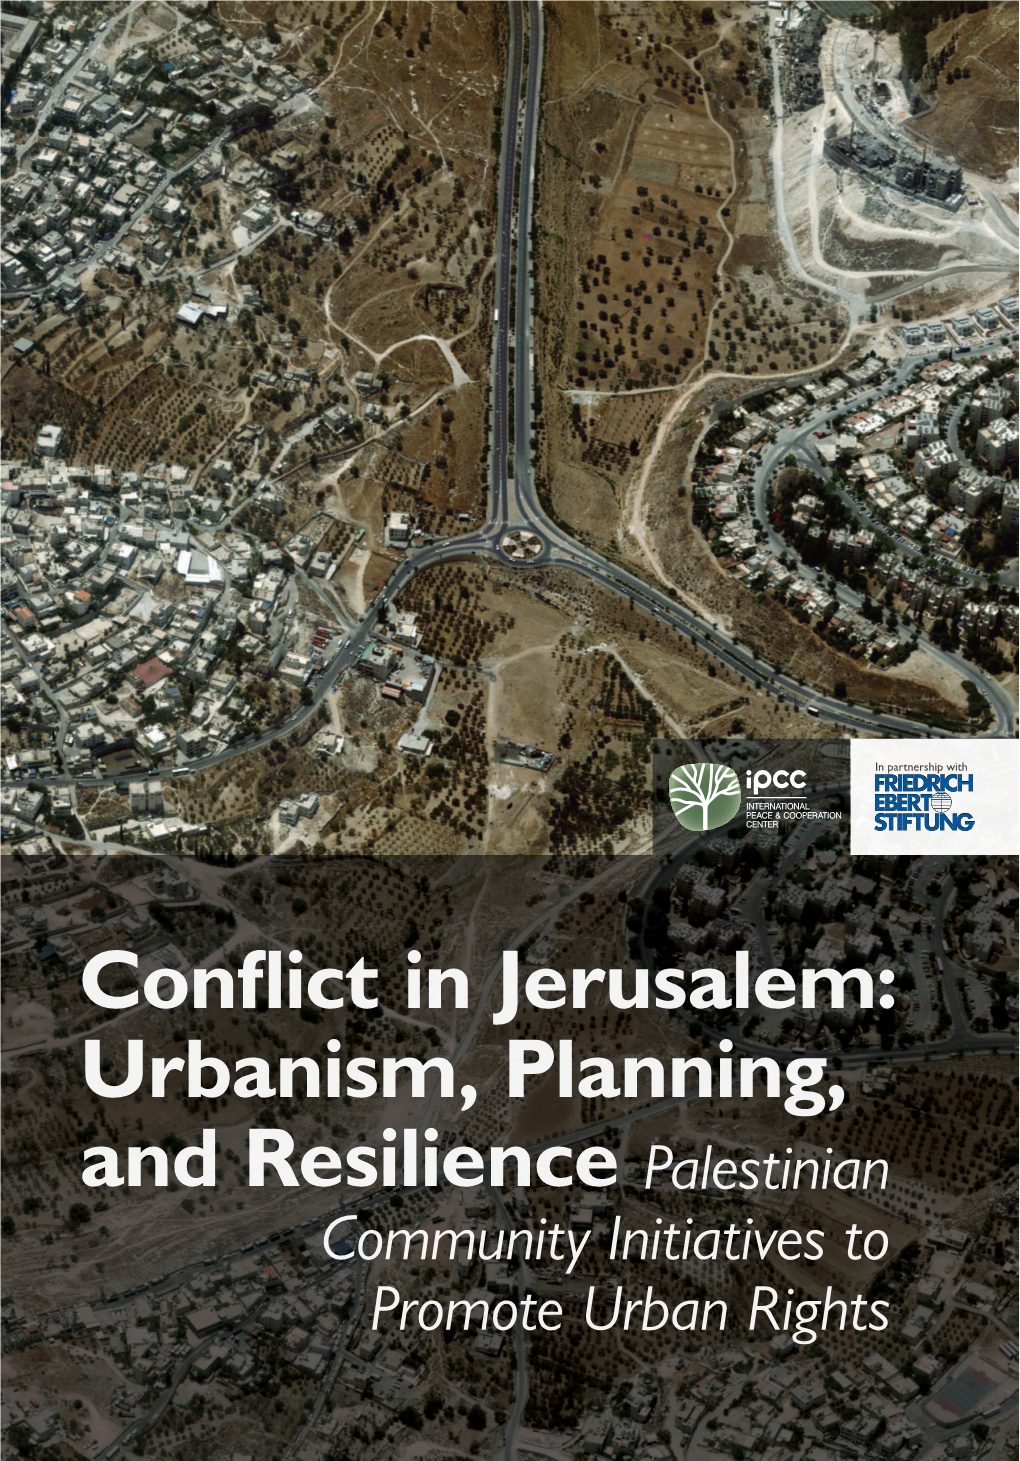 Conflict in Jerusalem: Urbanism, Planning, and Resilience Palestinian